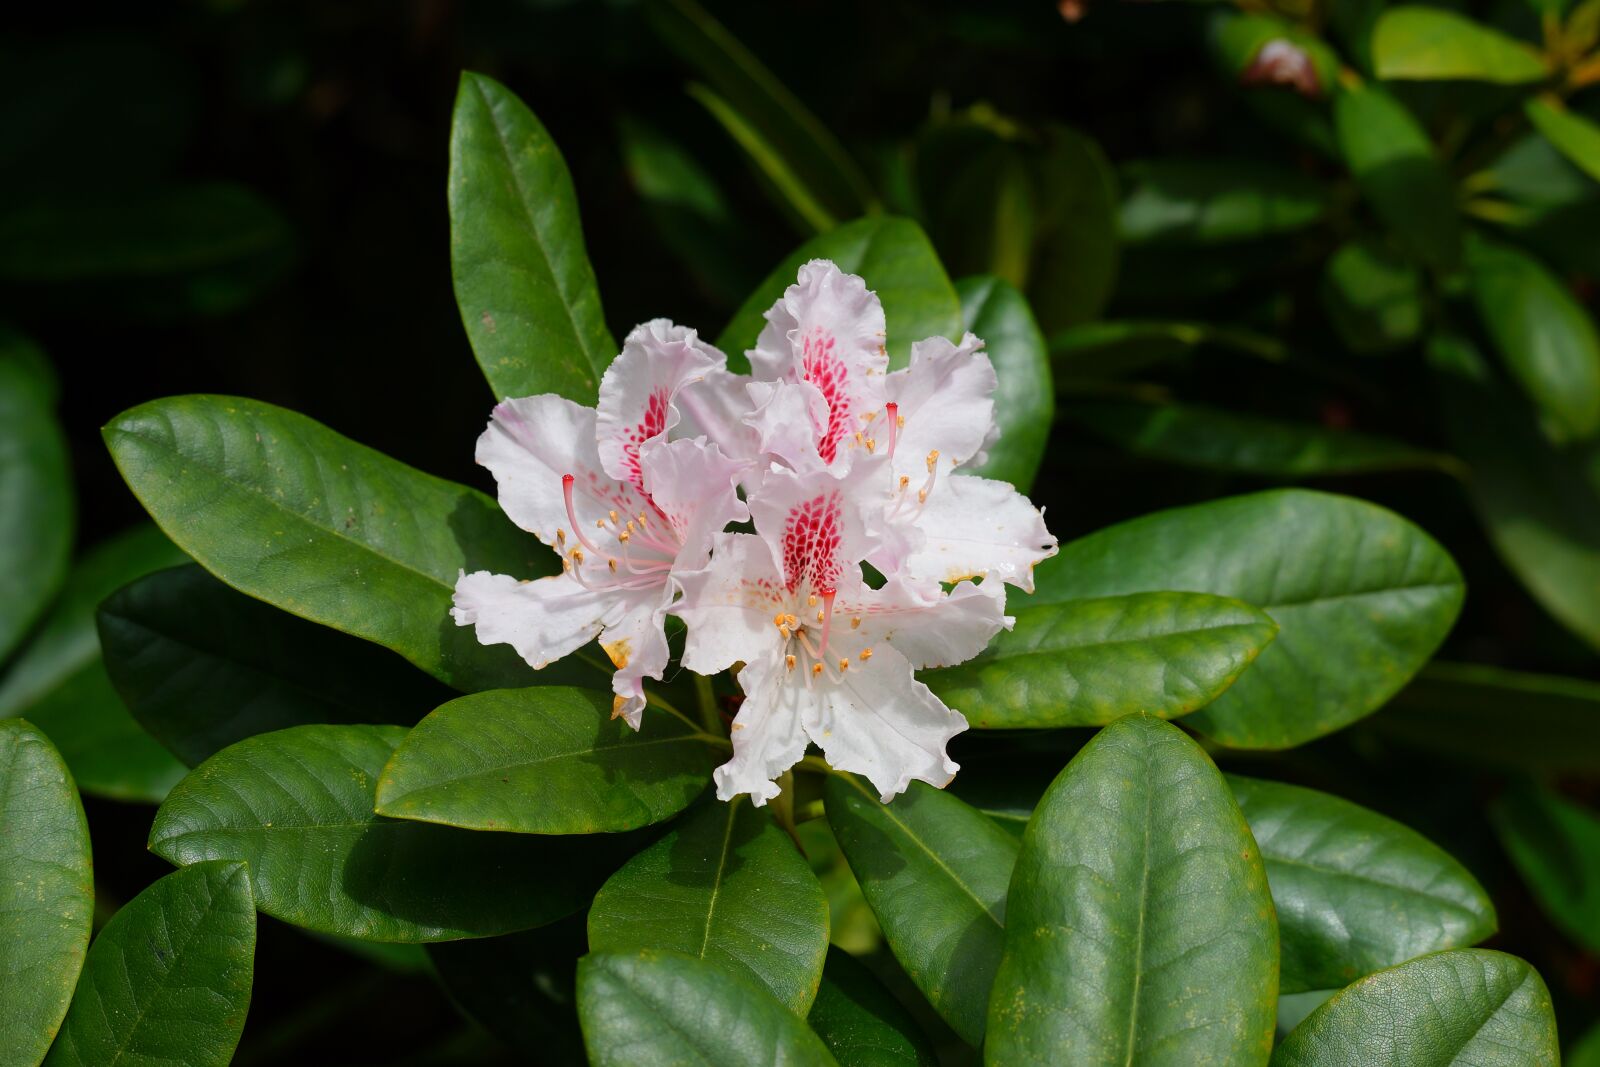 Sony a99 II sample photo. Rhododendron, blossom, bloom photography